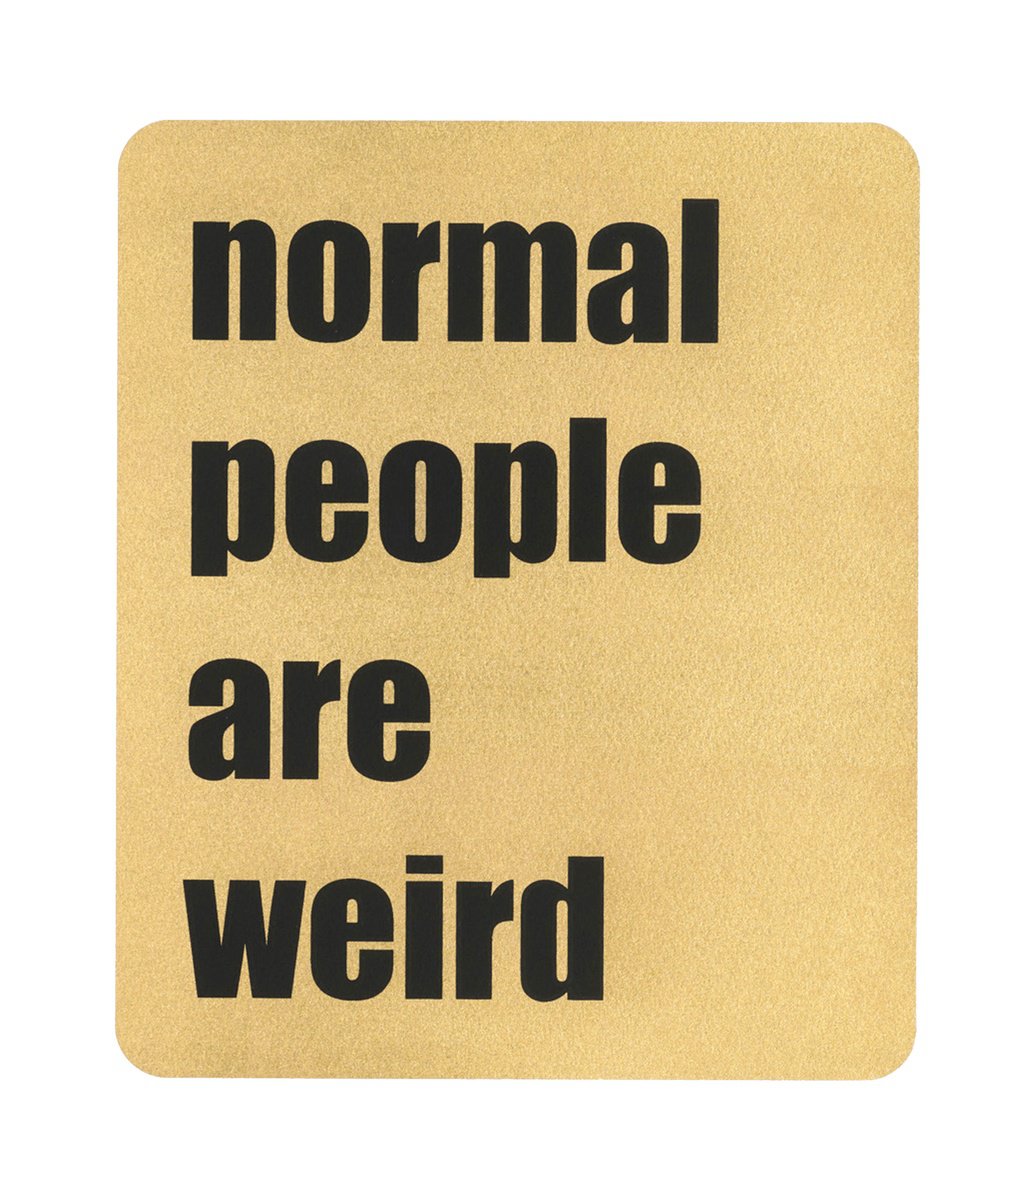 NORMAL PEOPLE ARE WEIRD (Black) by AAWatson